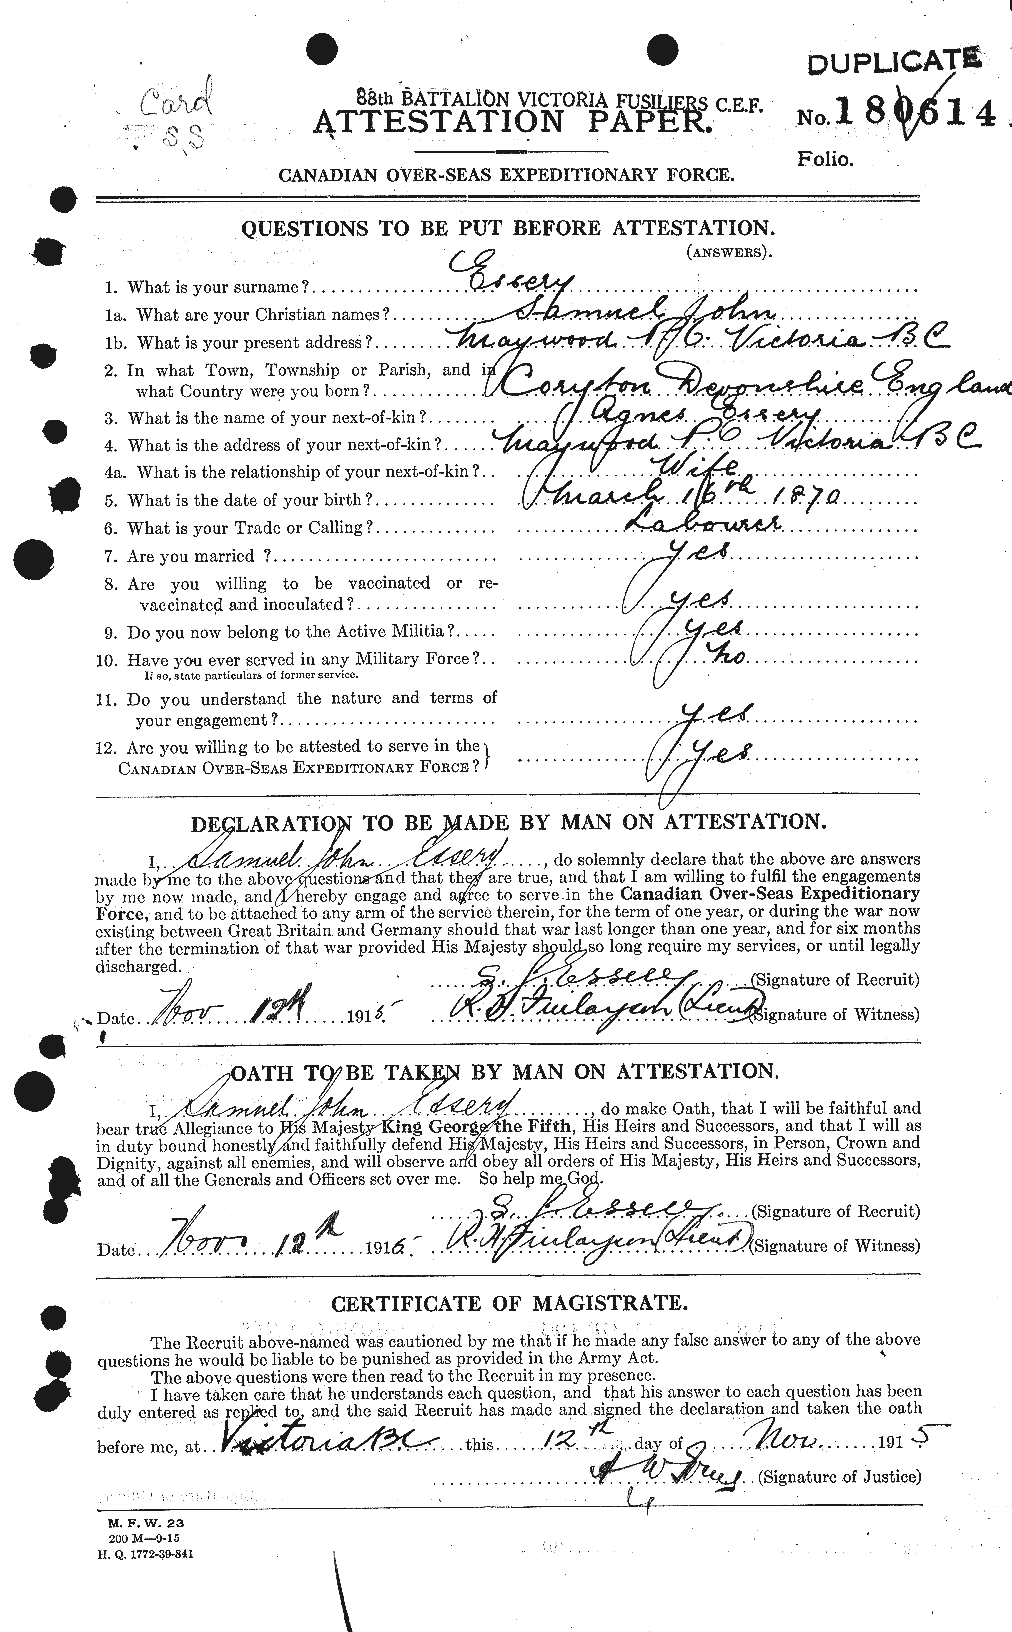 Personnel Records of the First World War - CEF 316676a